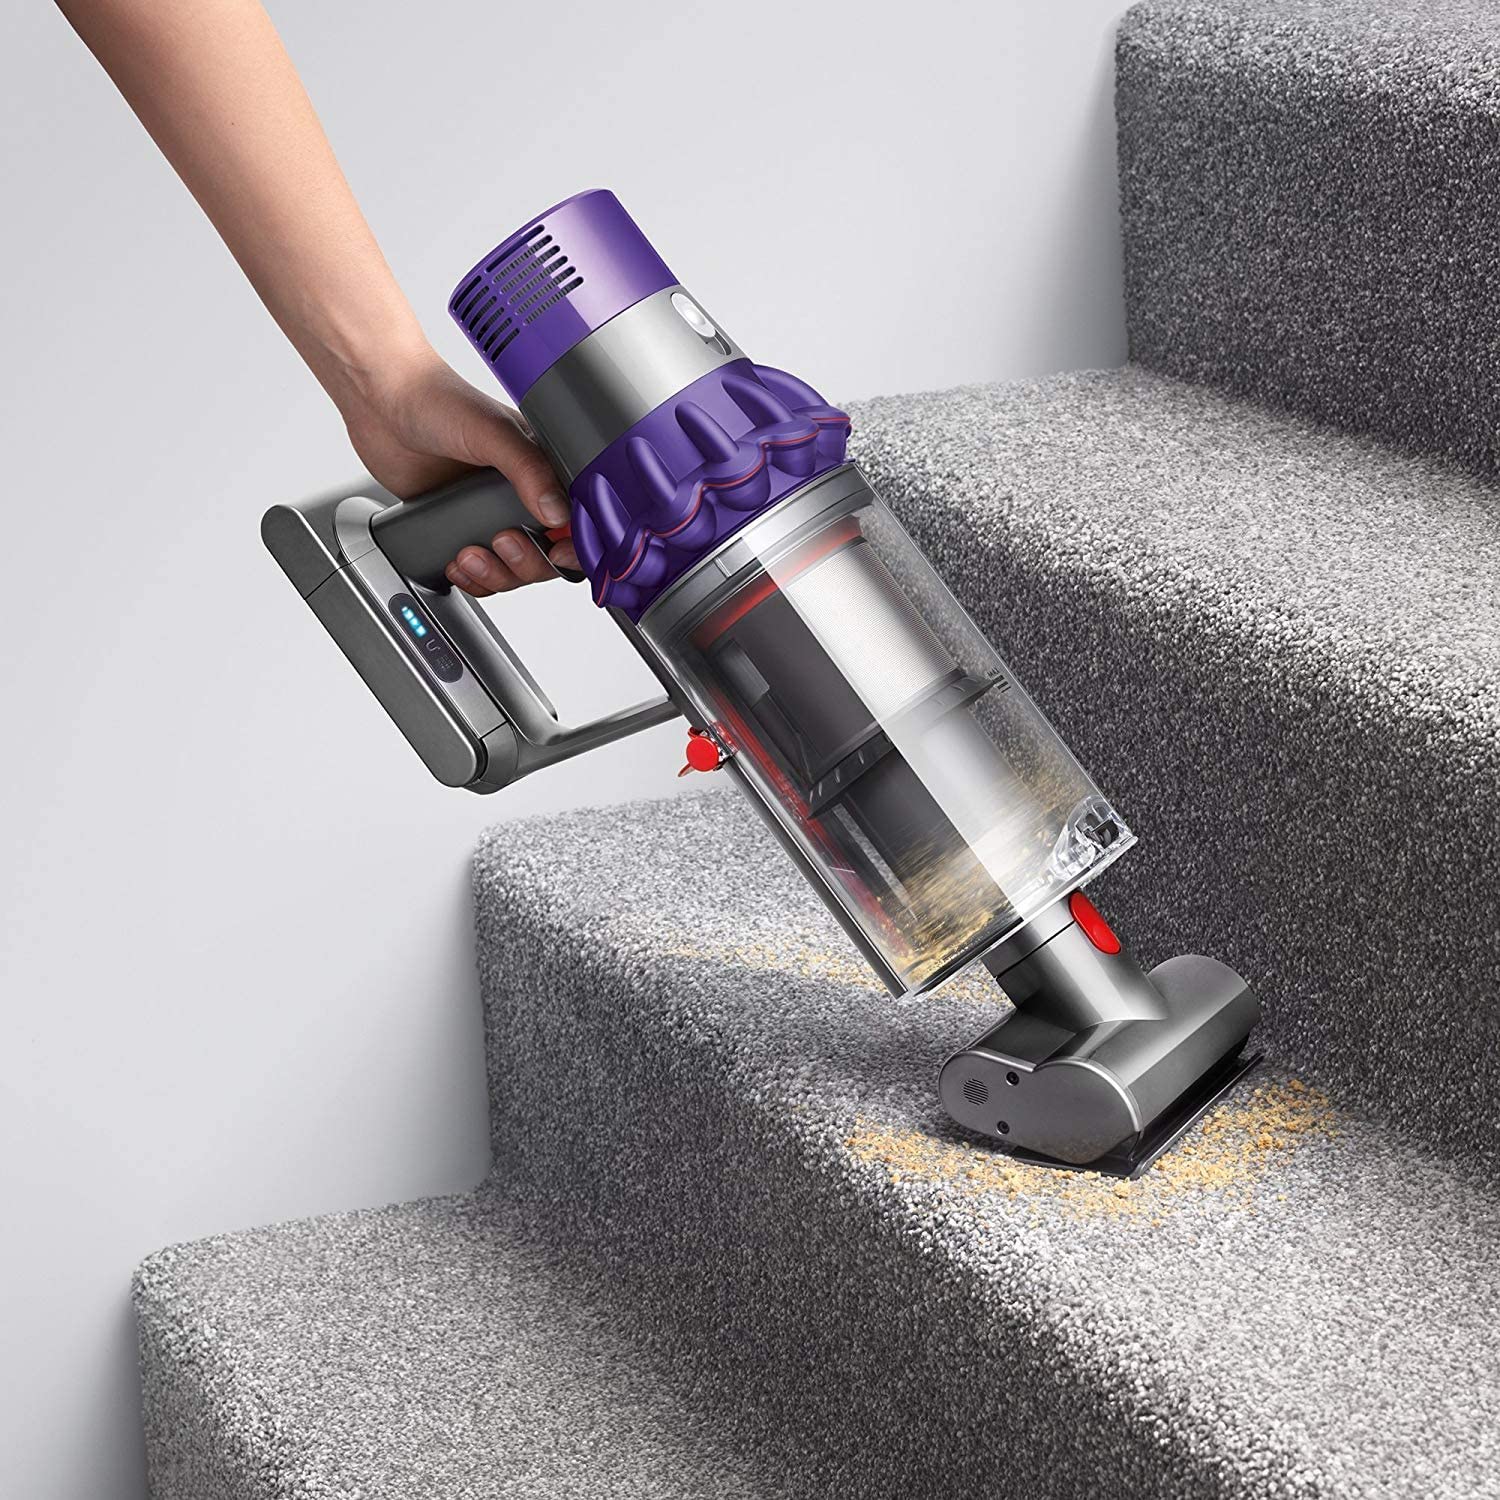 Dyson Cyclone V10 stair cleaning